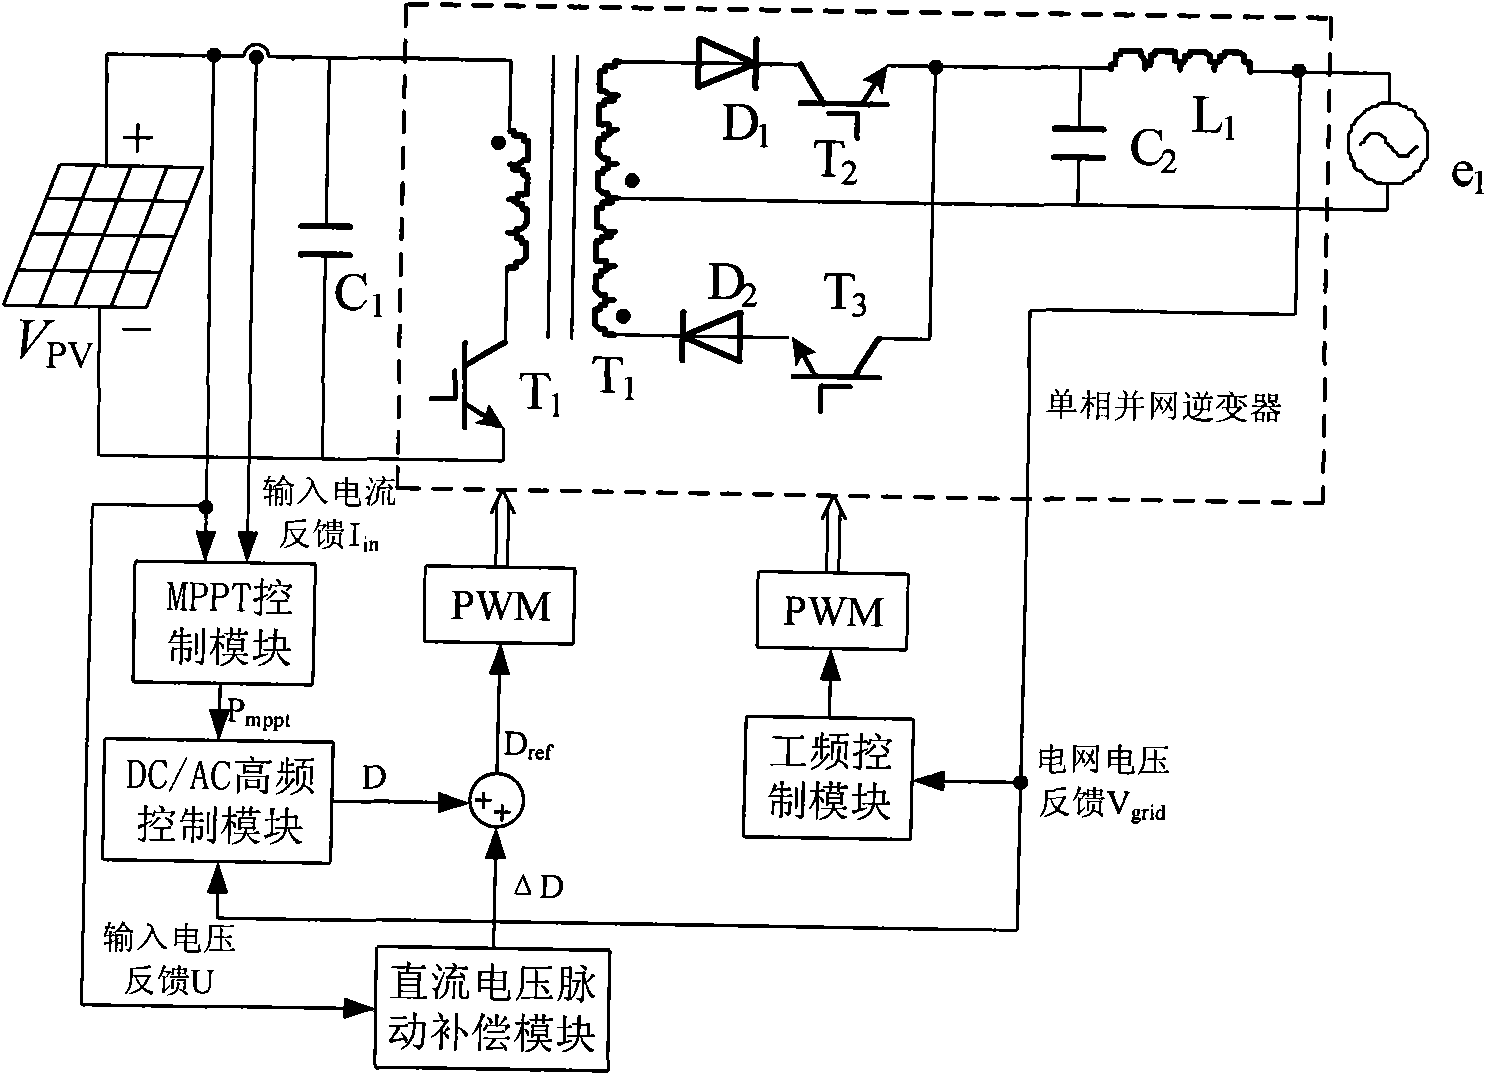 Compensation method of direct current (DC) voltage fluctuation of photovoltaic grid-connected inverter